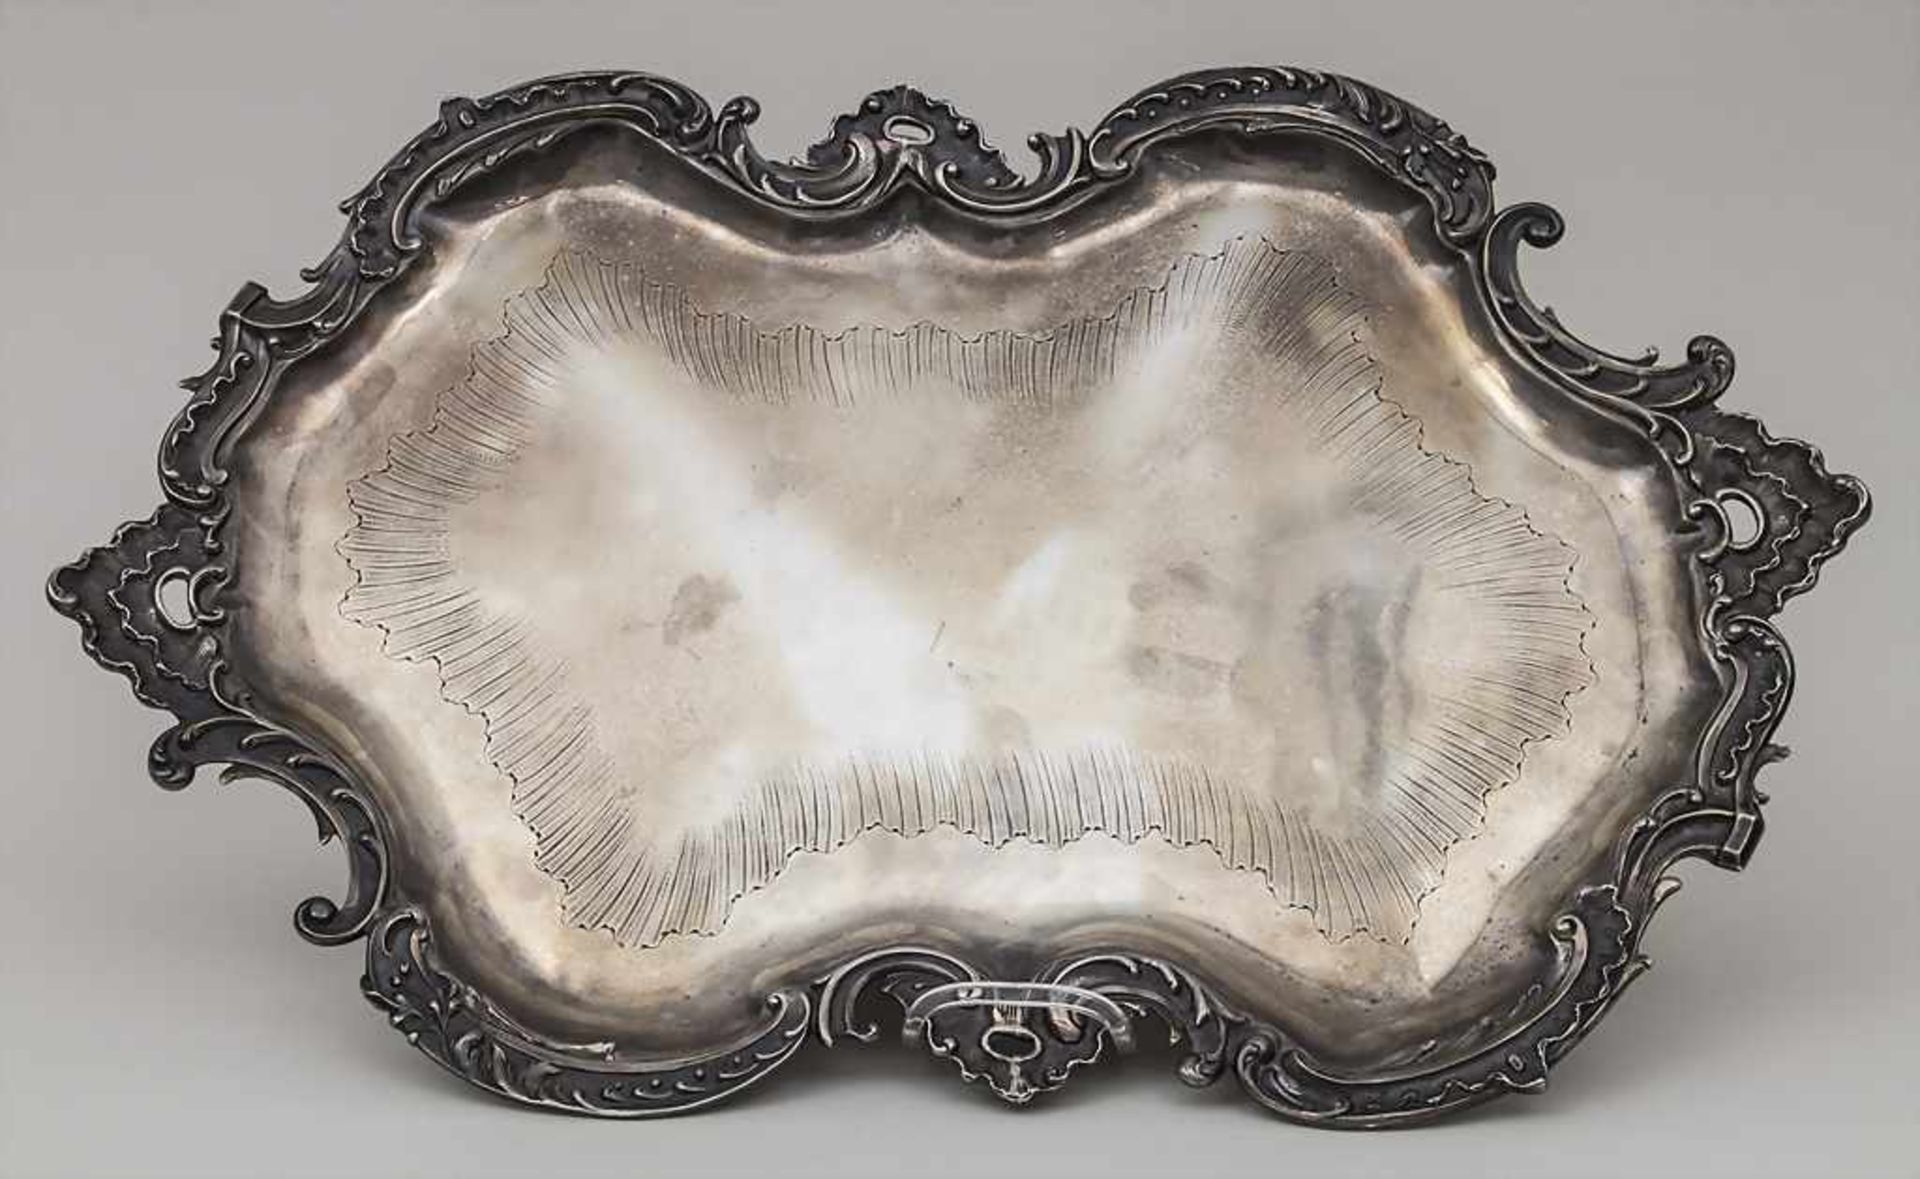 Großes Rokoko Tablett / A large Rococo silver tray, wohl deutsch, um 1880Material: Silber,